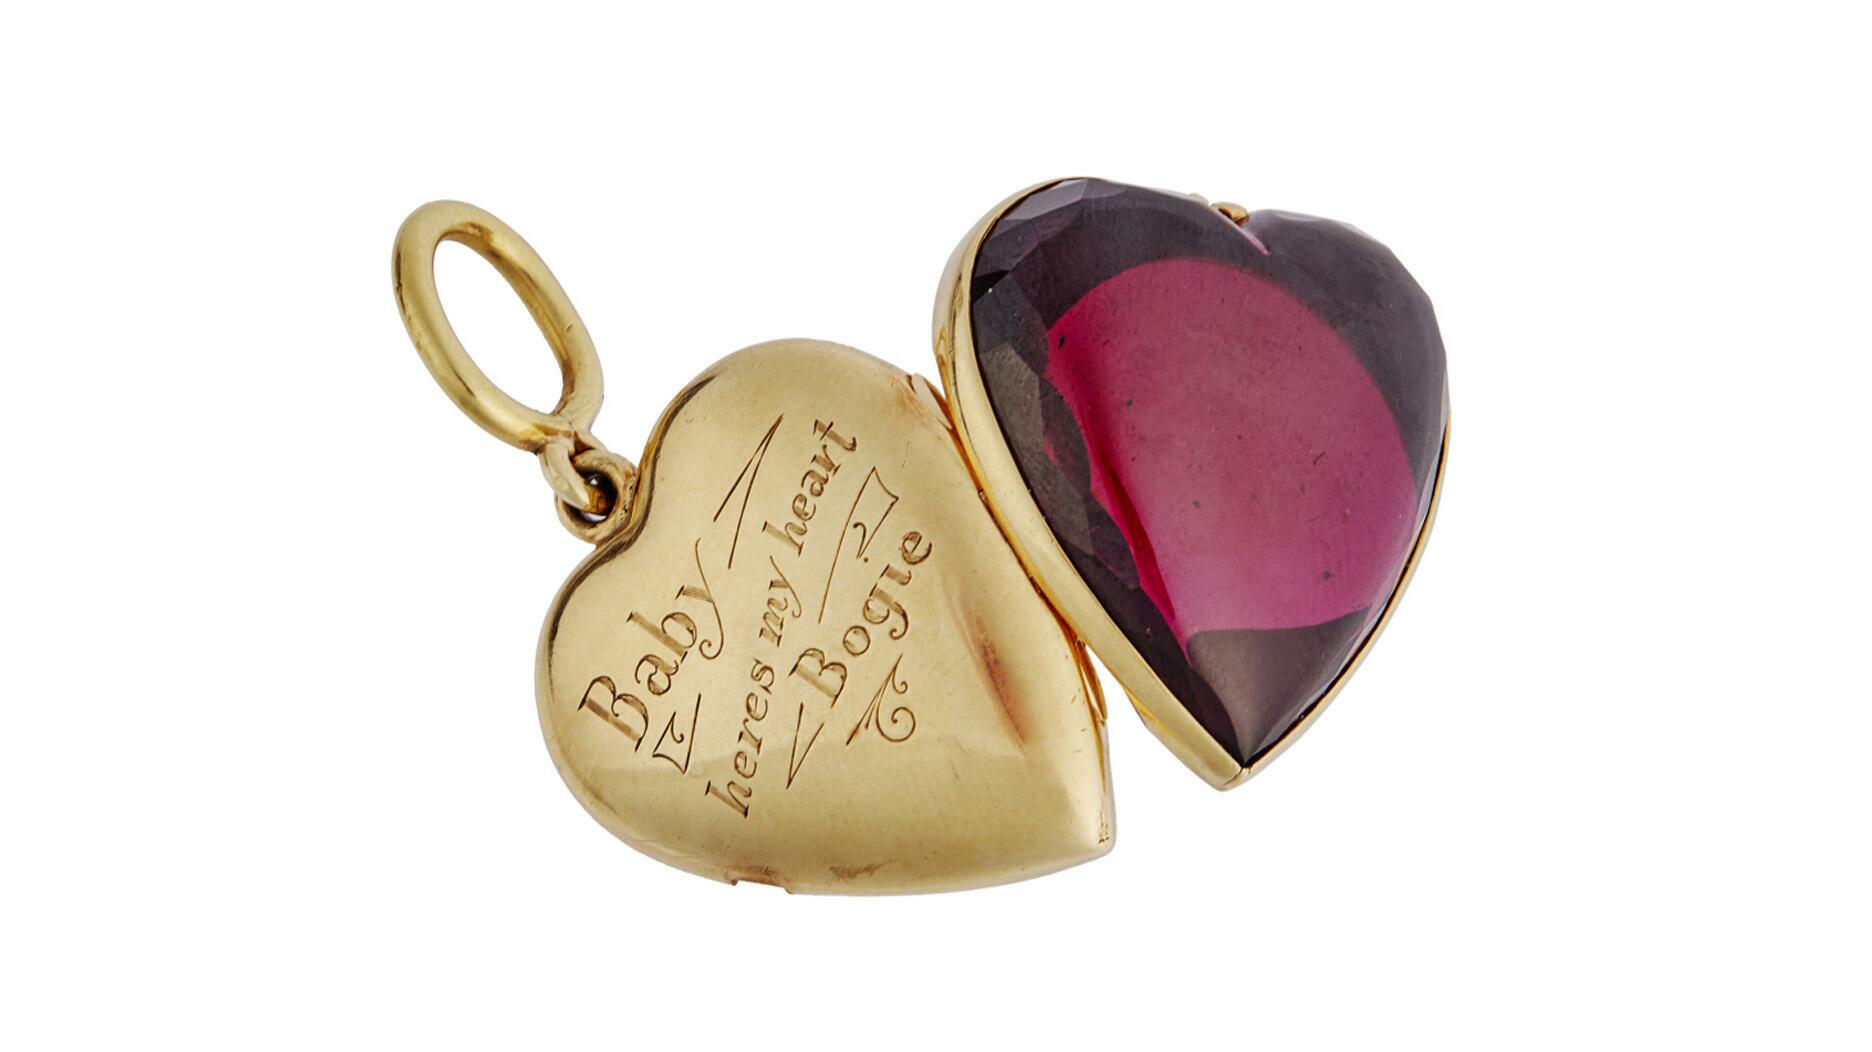 Humphrey Bogart gave Lauren Bacall this gold heart-shaped locket set with a simulated garnet and had it inscribed for her. A buyer paid nearly $60,000 for it at a recent auction of Hollywood memorabilia.